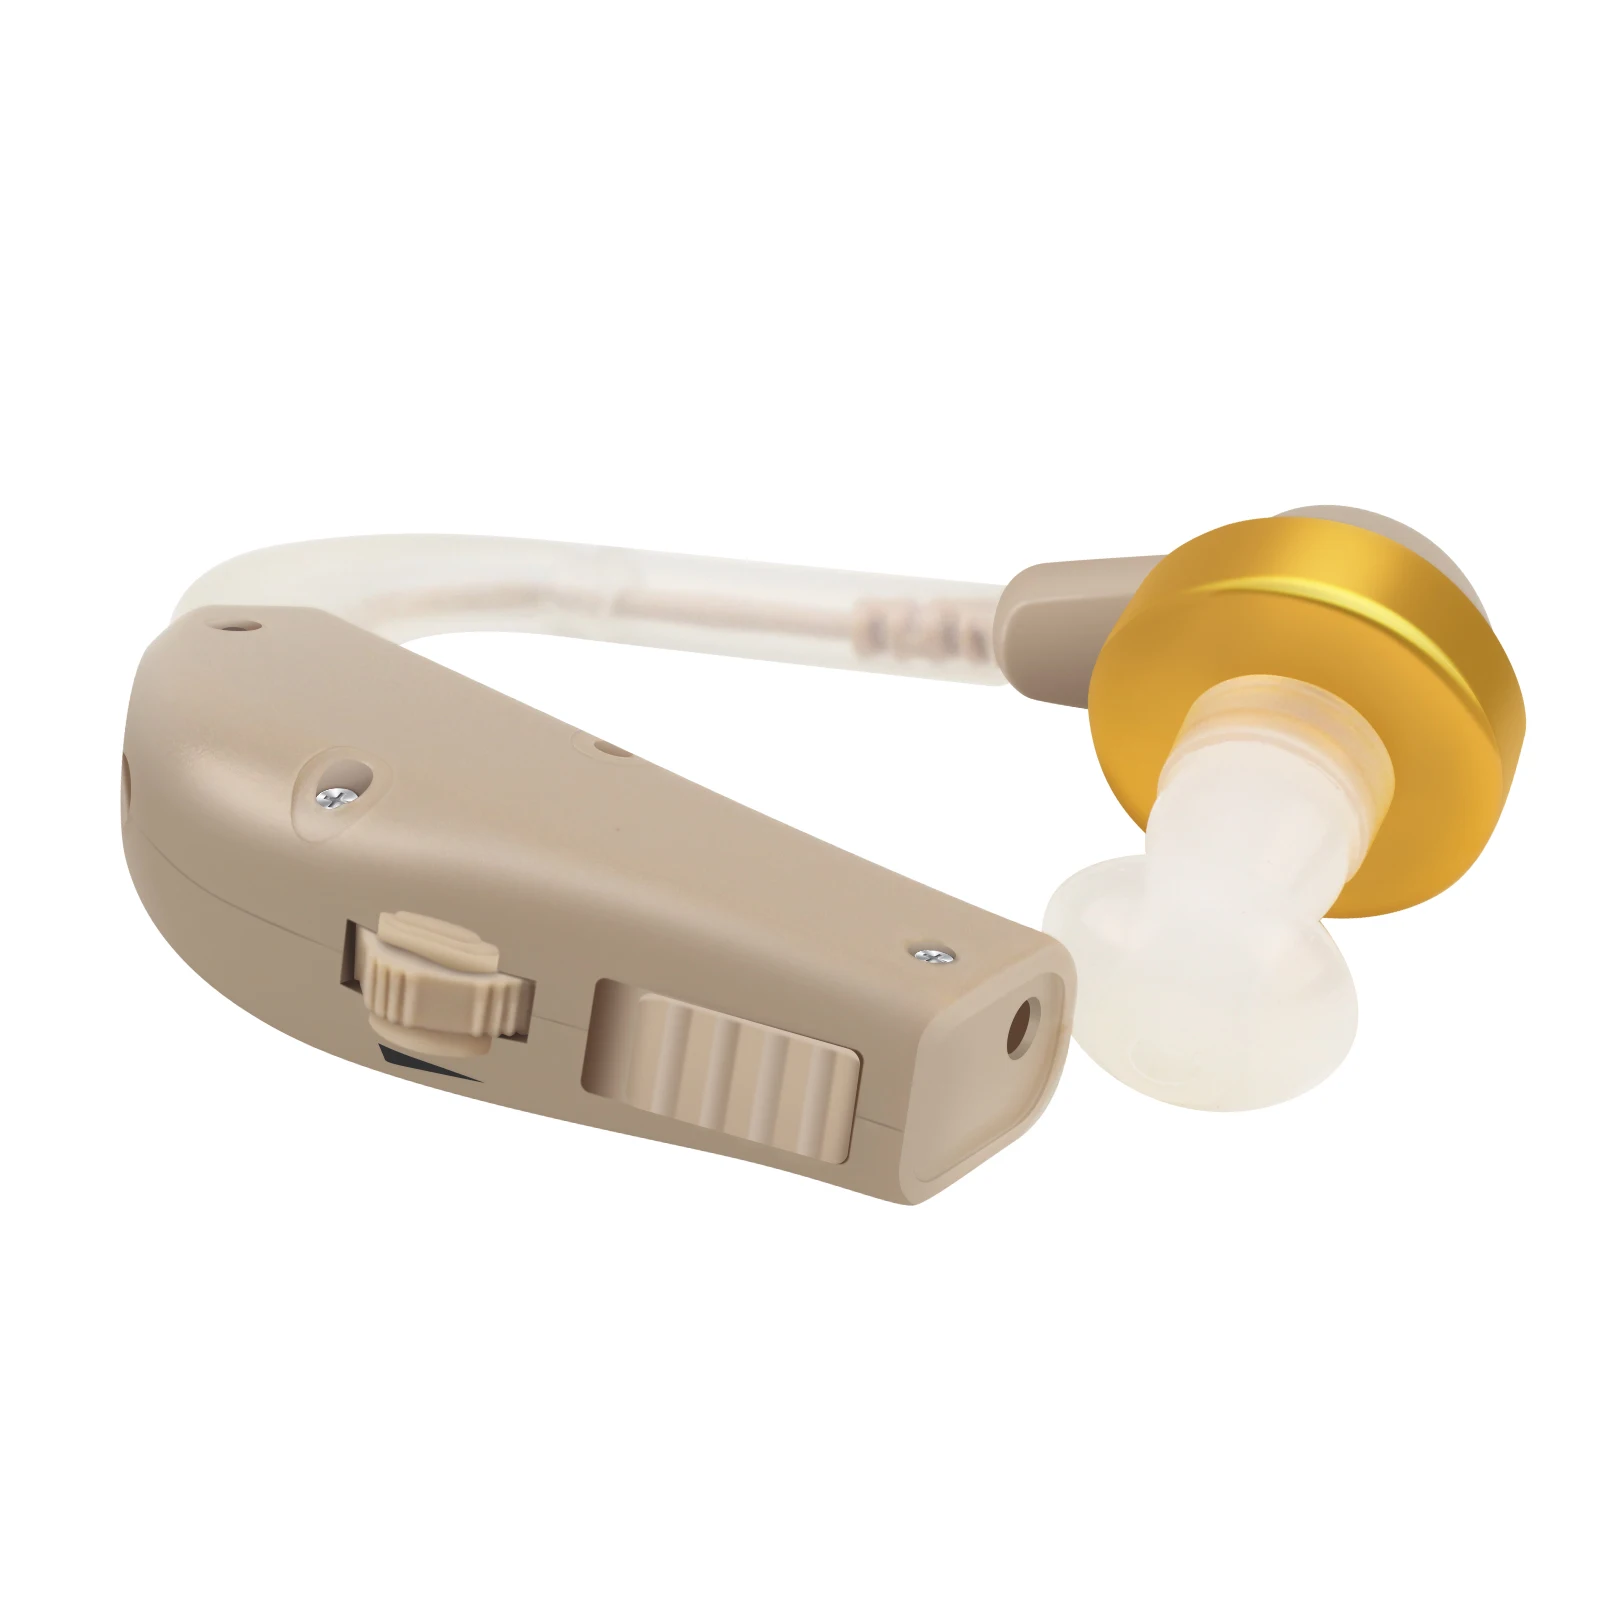 

audifonos Mini Hearing Aid Ear Sound Amplifier Adjustable Tone Hearing Aids Portable Ear Hearing Amplifier for the Deaf Elderly